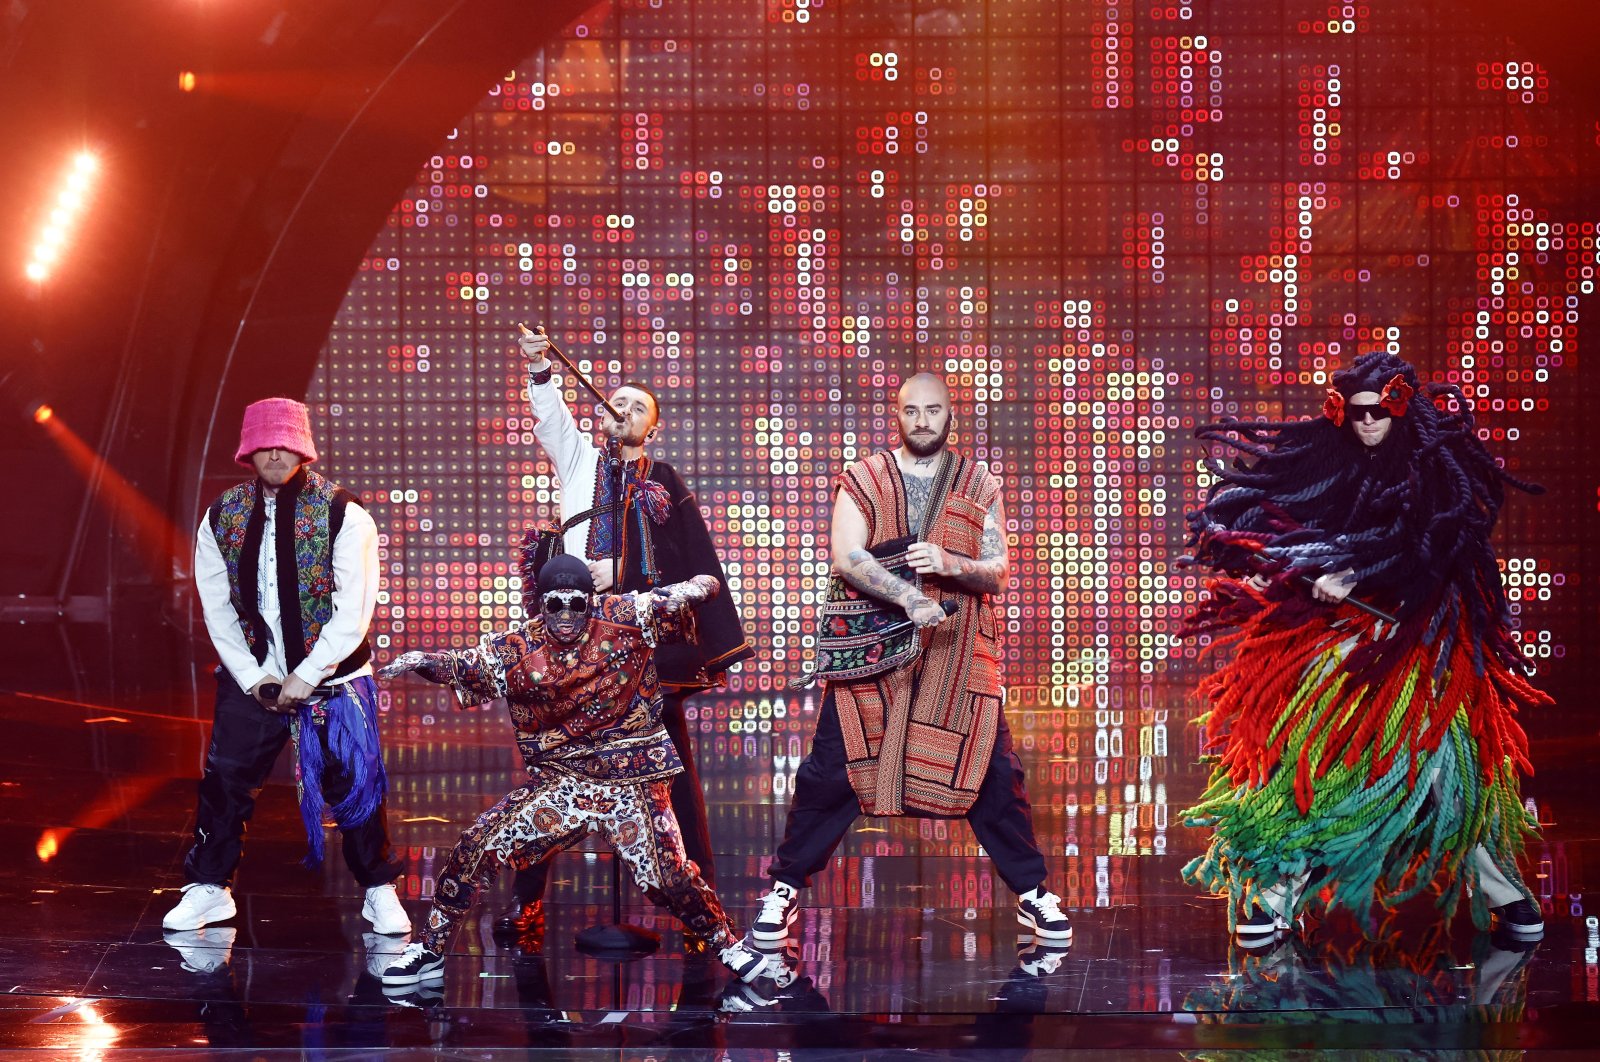 Kalush Orchestra from Ukraine perform during the first semi-final of the 2022 Eurovision Song Contest in Turin, Italy, May 10, 2022. (REUTERS)